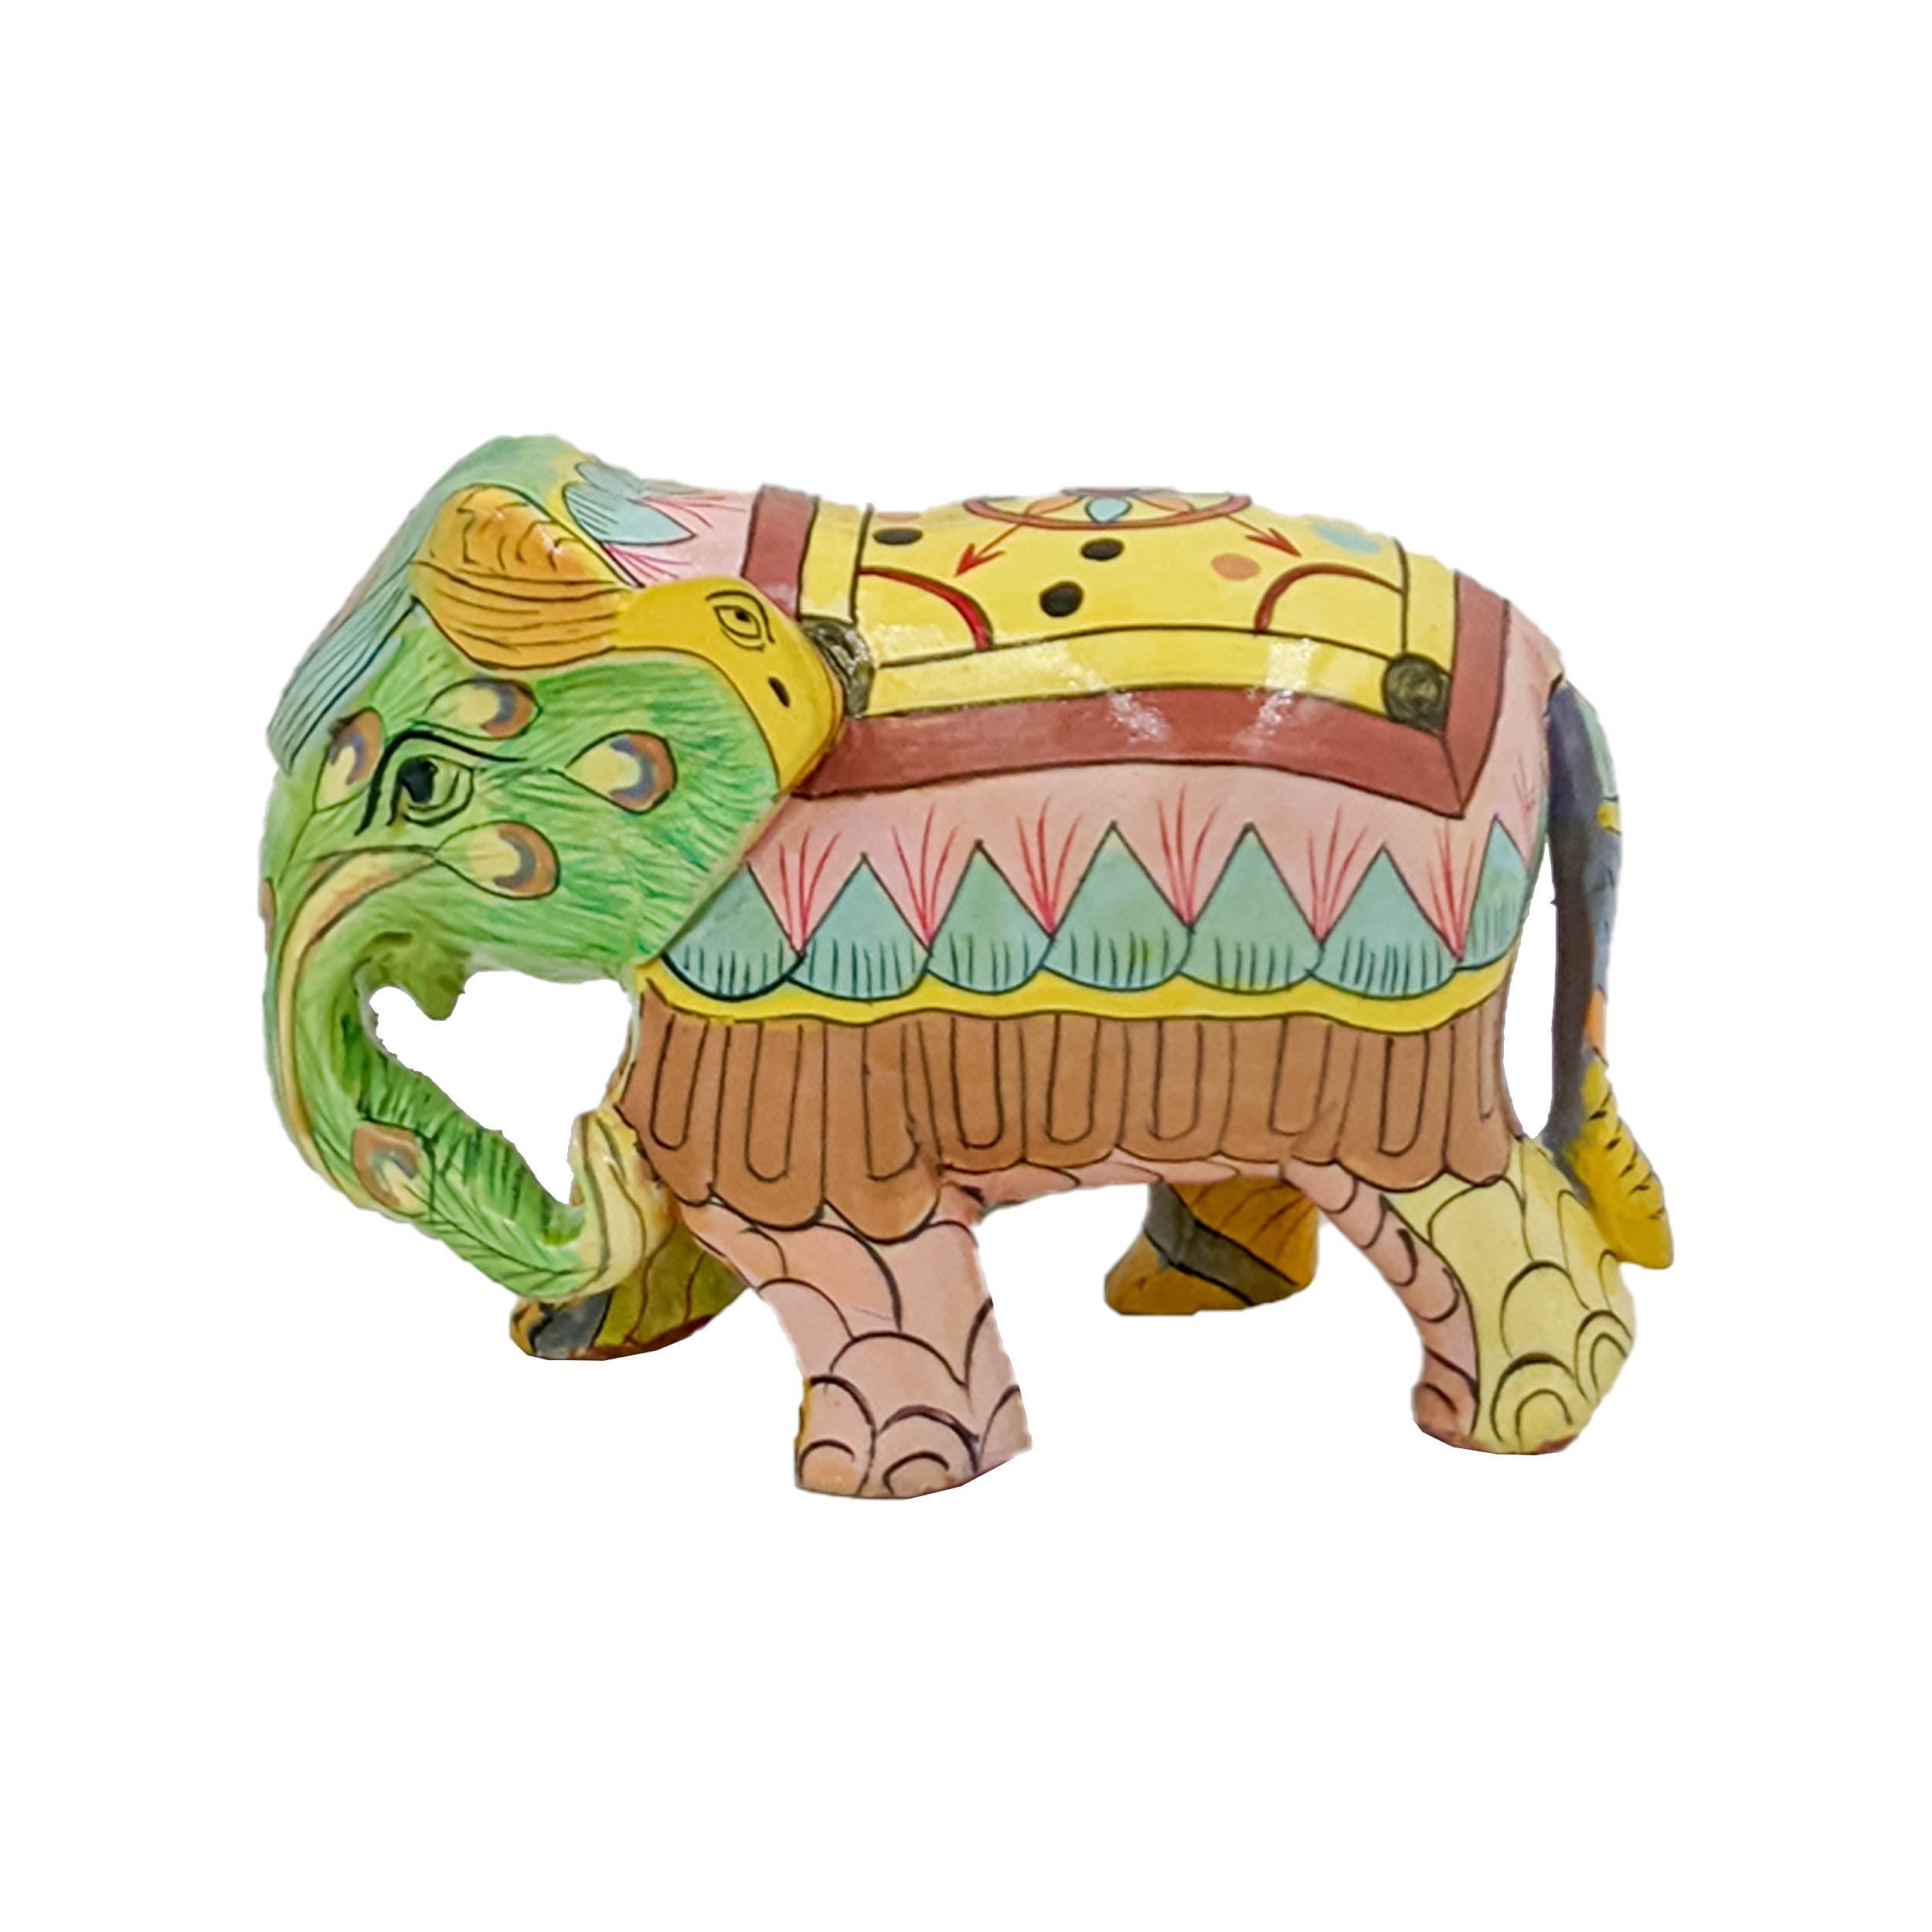 Handmade Painted Trunk Down Carved Elephant - Exquisite Wooden Handicraft (3 Inch)